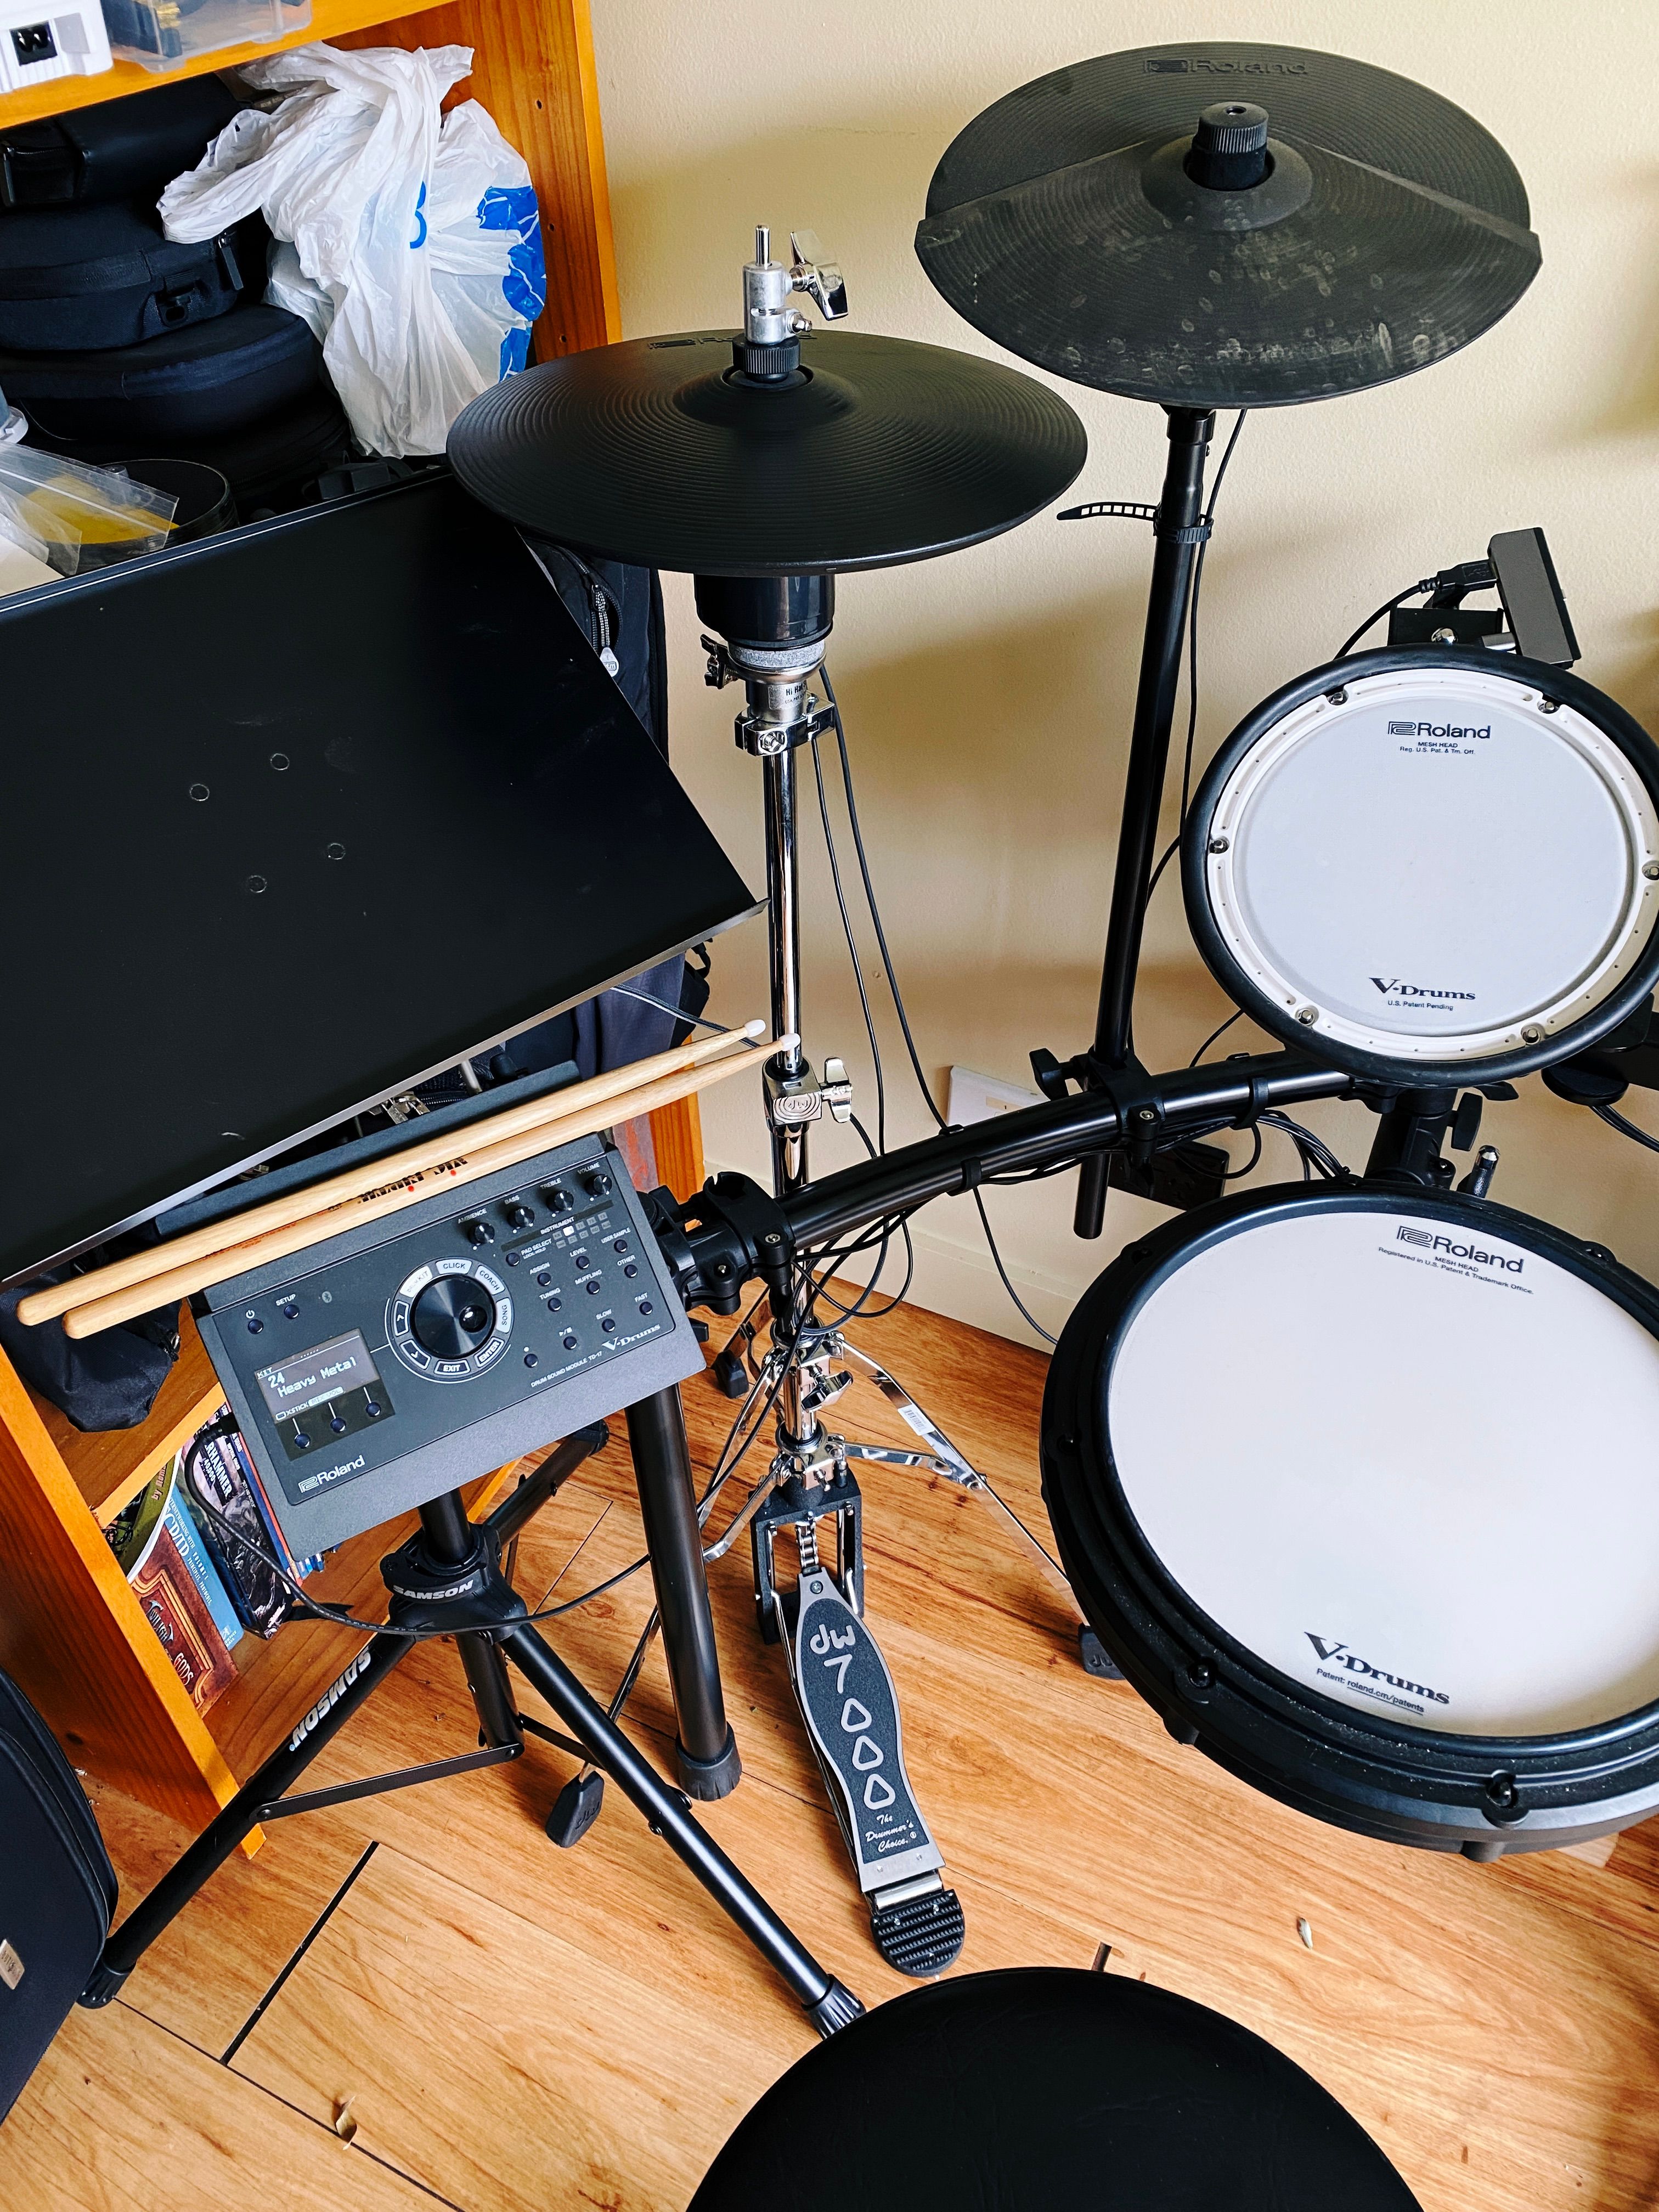 A photo of a compact electronic drum kit, with a very shiny metal acoustic hi-hat stand with a black plastic cymbal mounted on it sitting behind the kit.